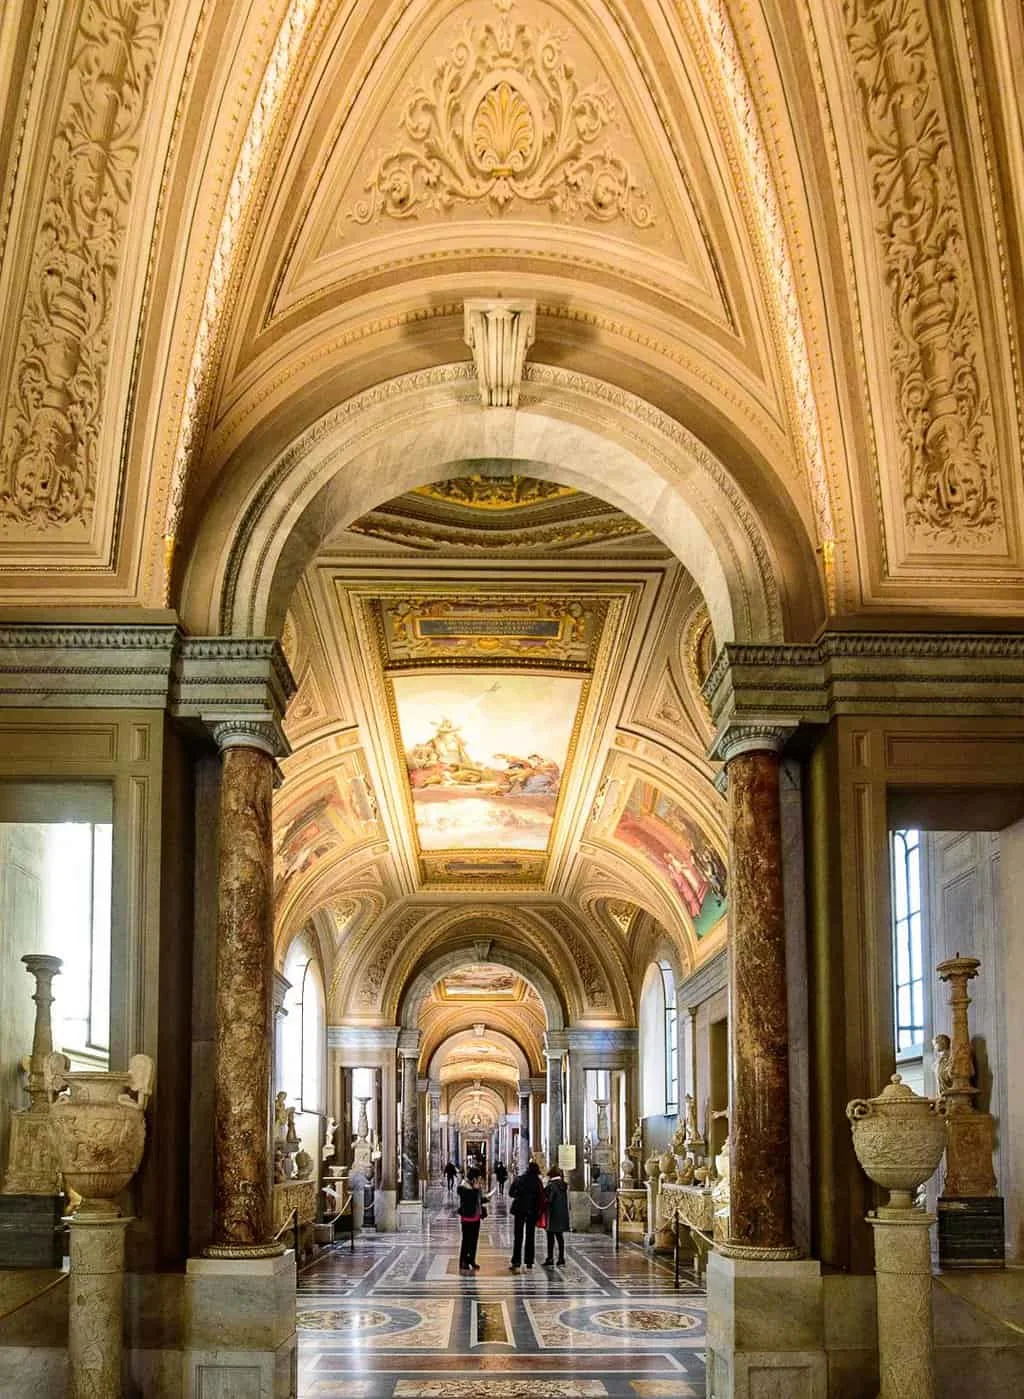 People walking down the ornate halls of the Vatican Museums.